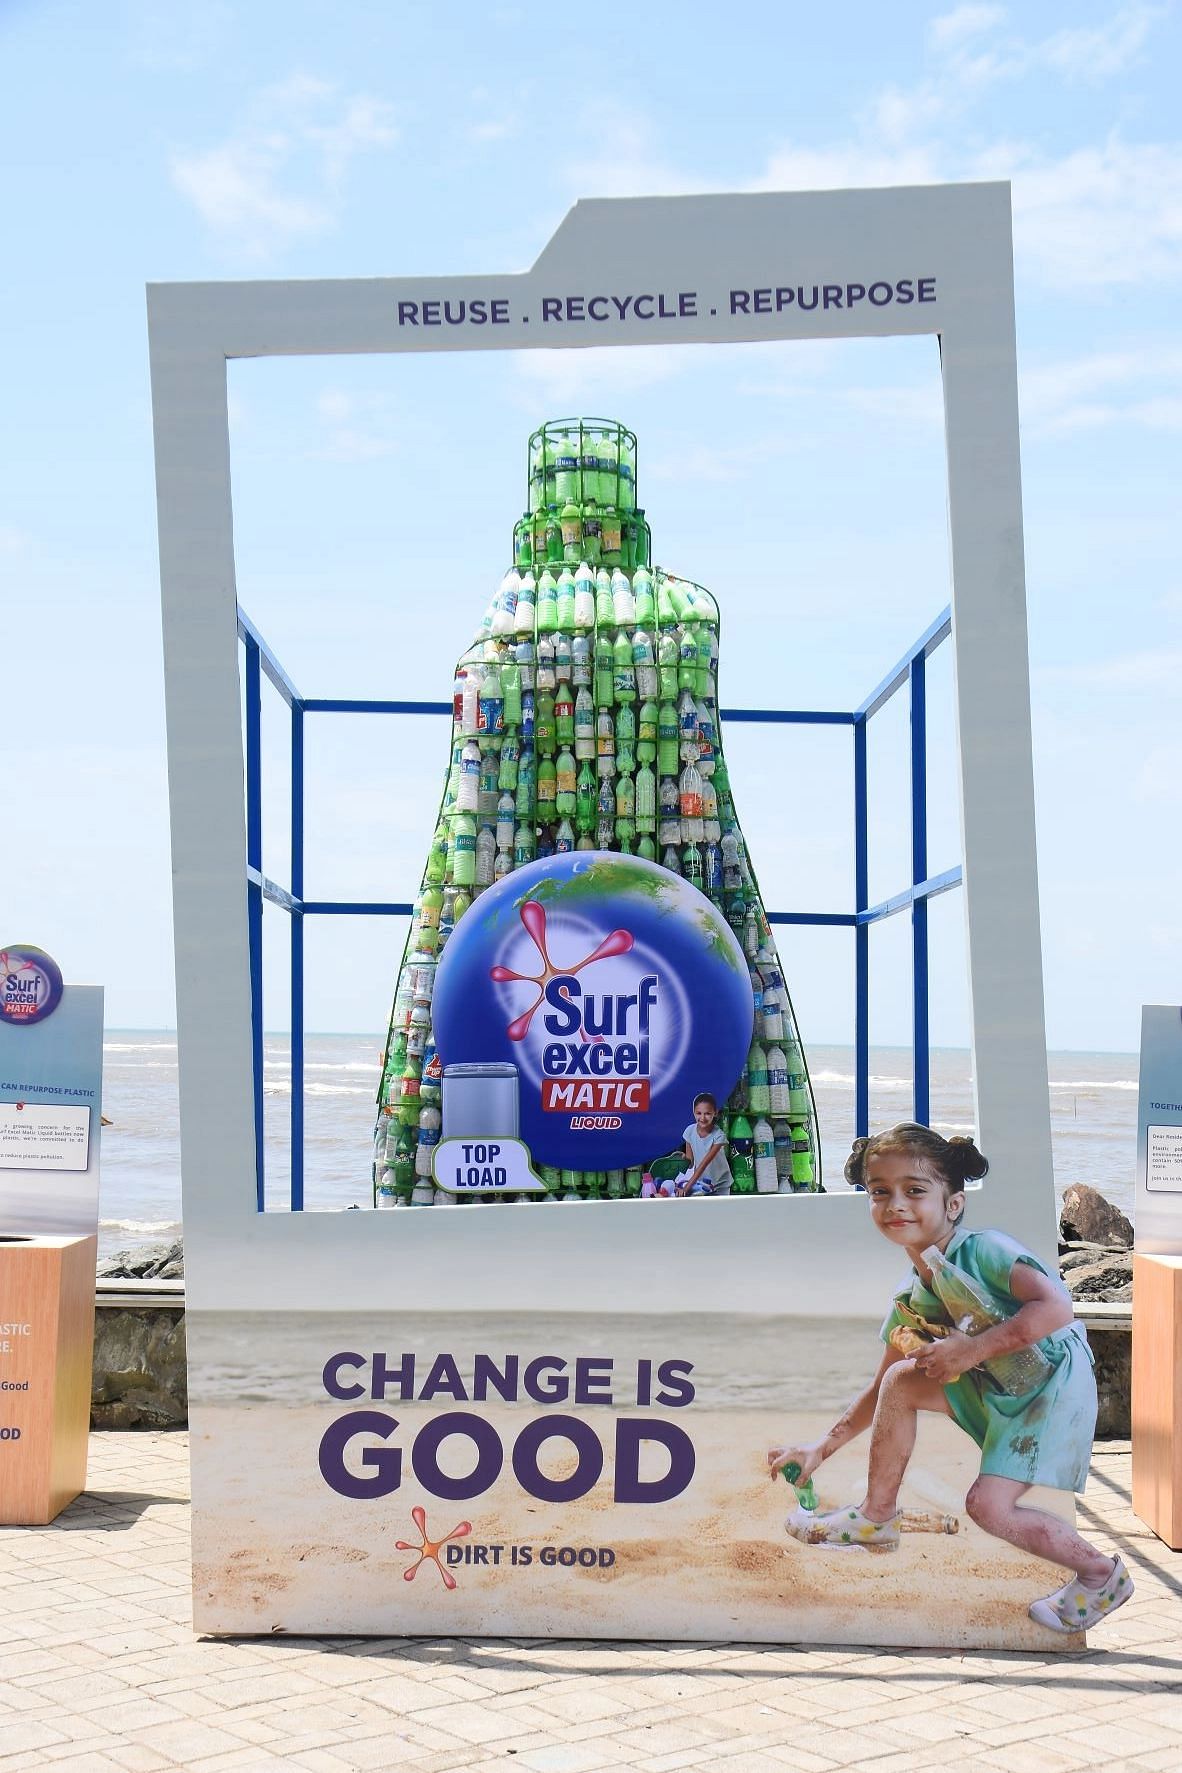 Surf Excel Matic’s bottle installation aims to reduce plastic wastage 